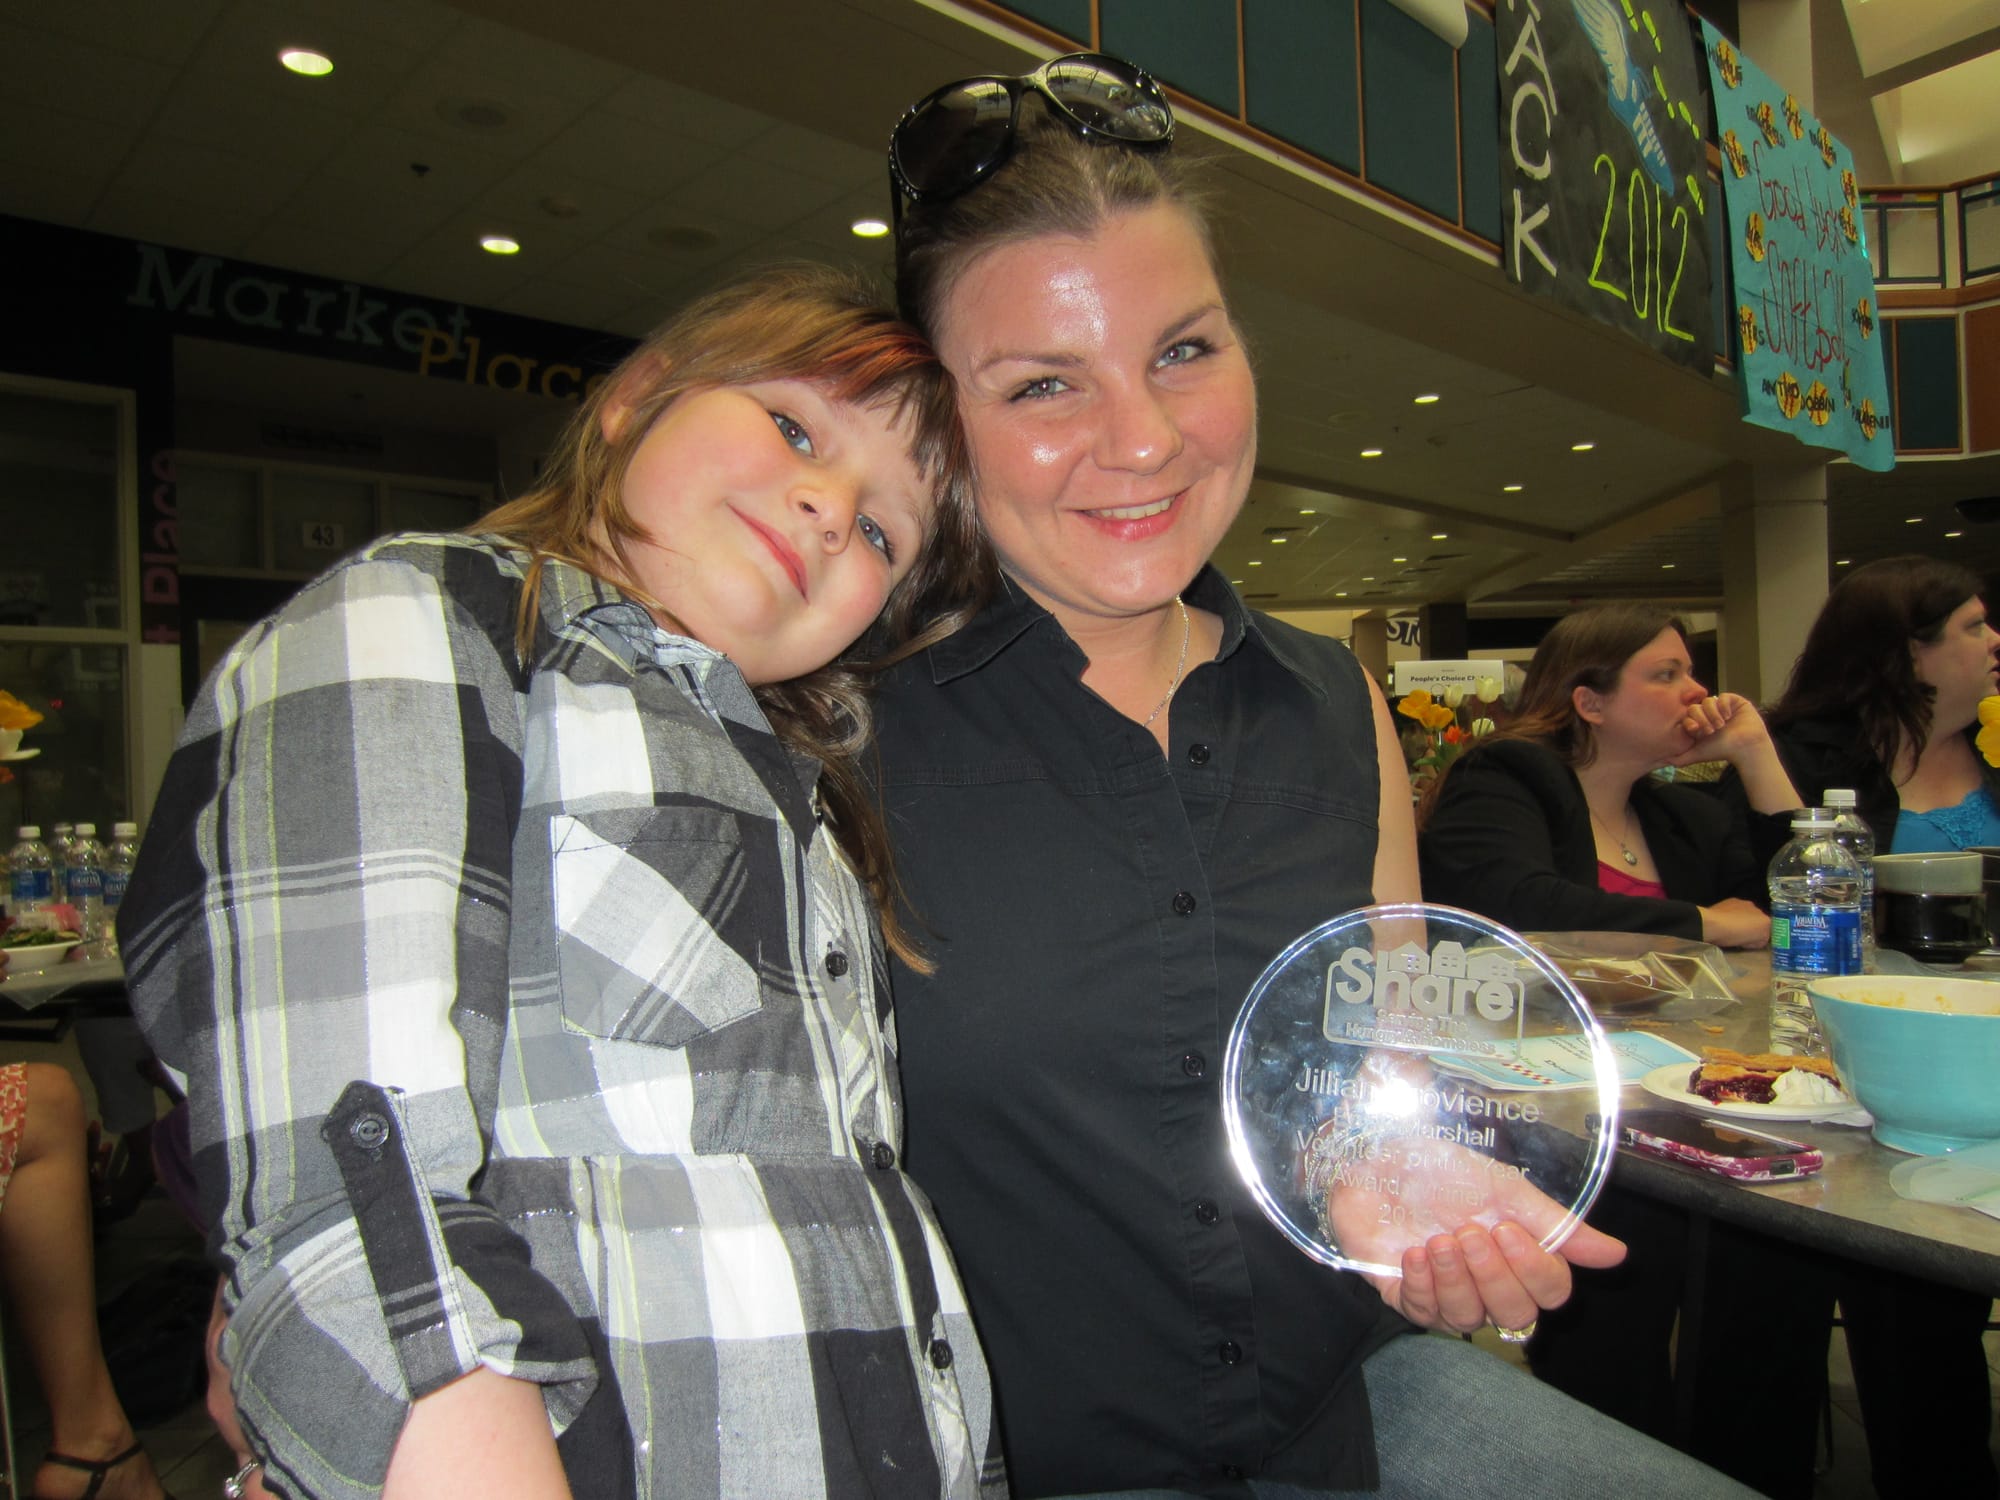 Salmon Creek: Shareis 2012 Volunteer of the Year recipient, Jillian Provience, right, with her daughter, Kaysea Ackley.